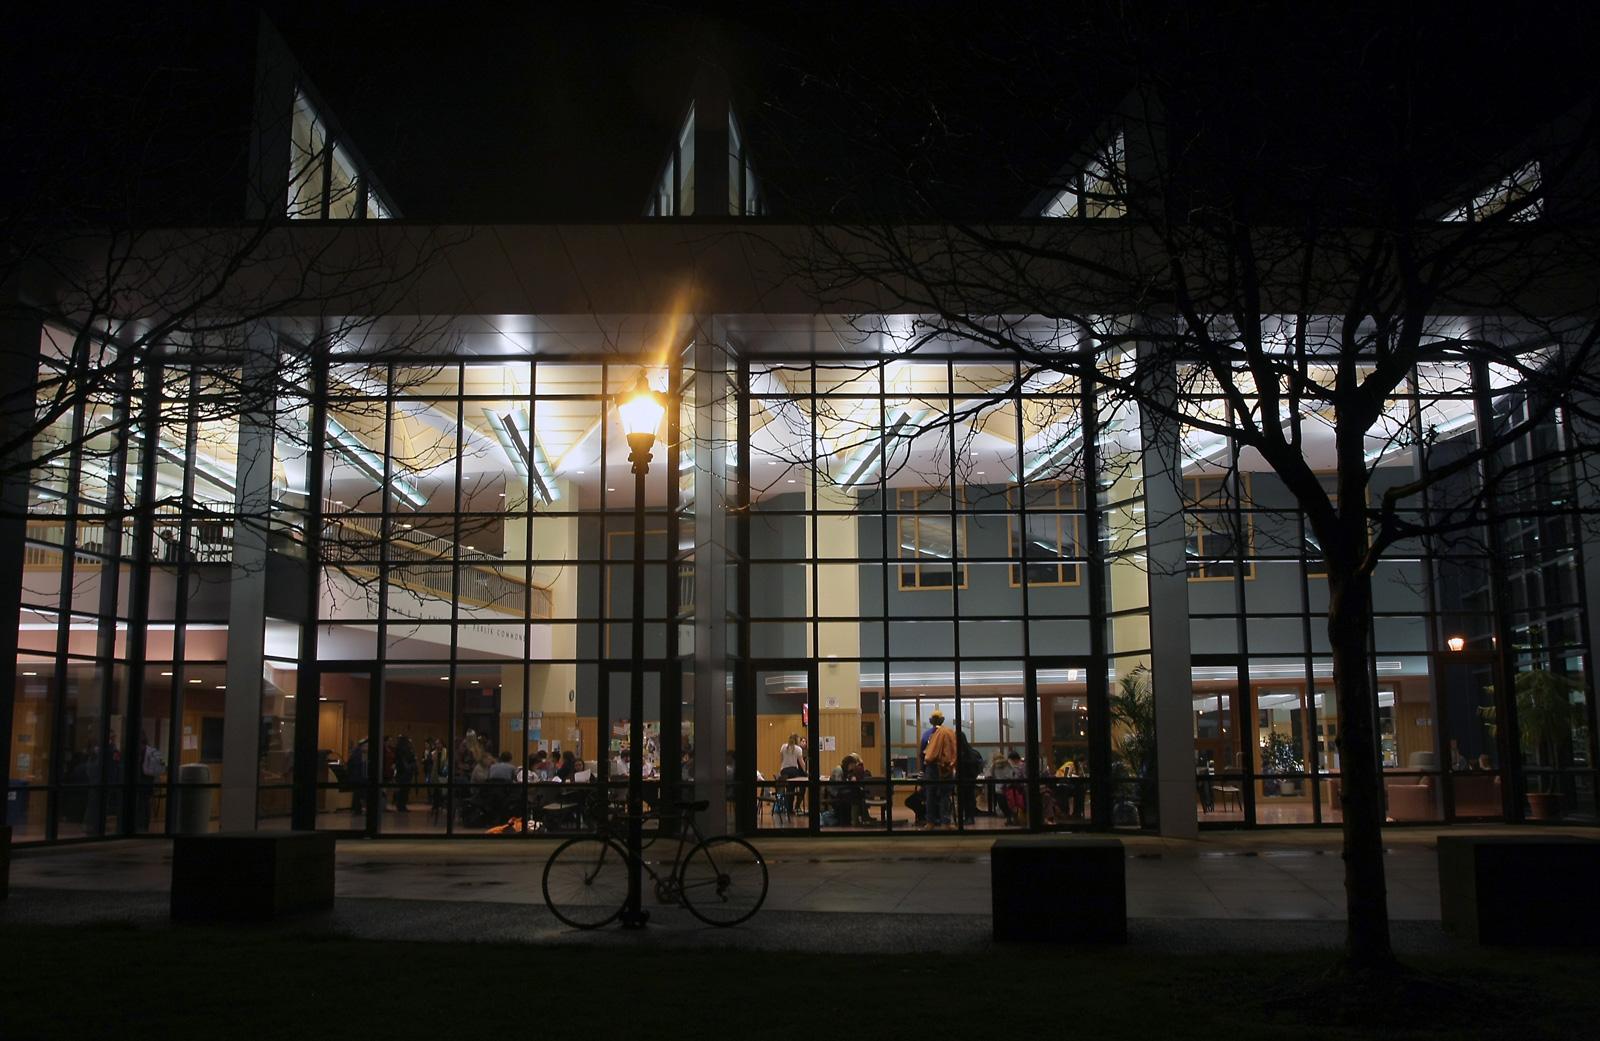 A nighttime view looking into the busy, lit up atrium of the science center.